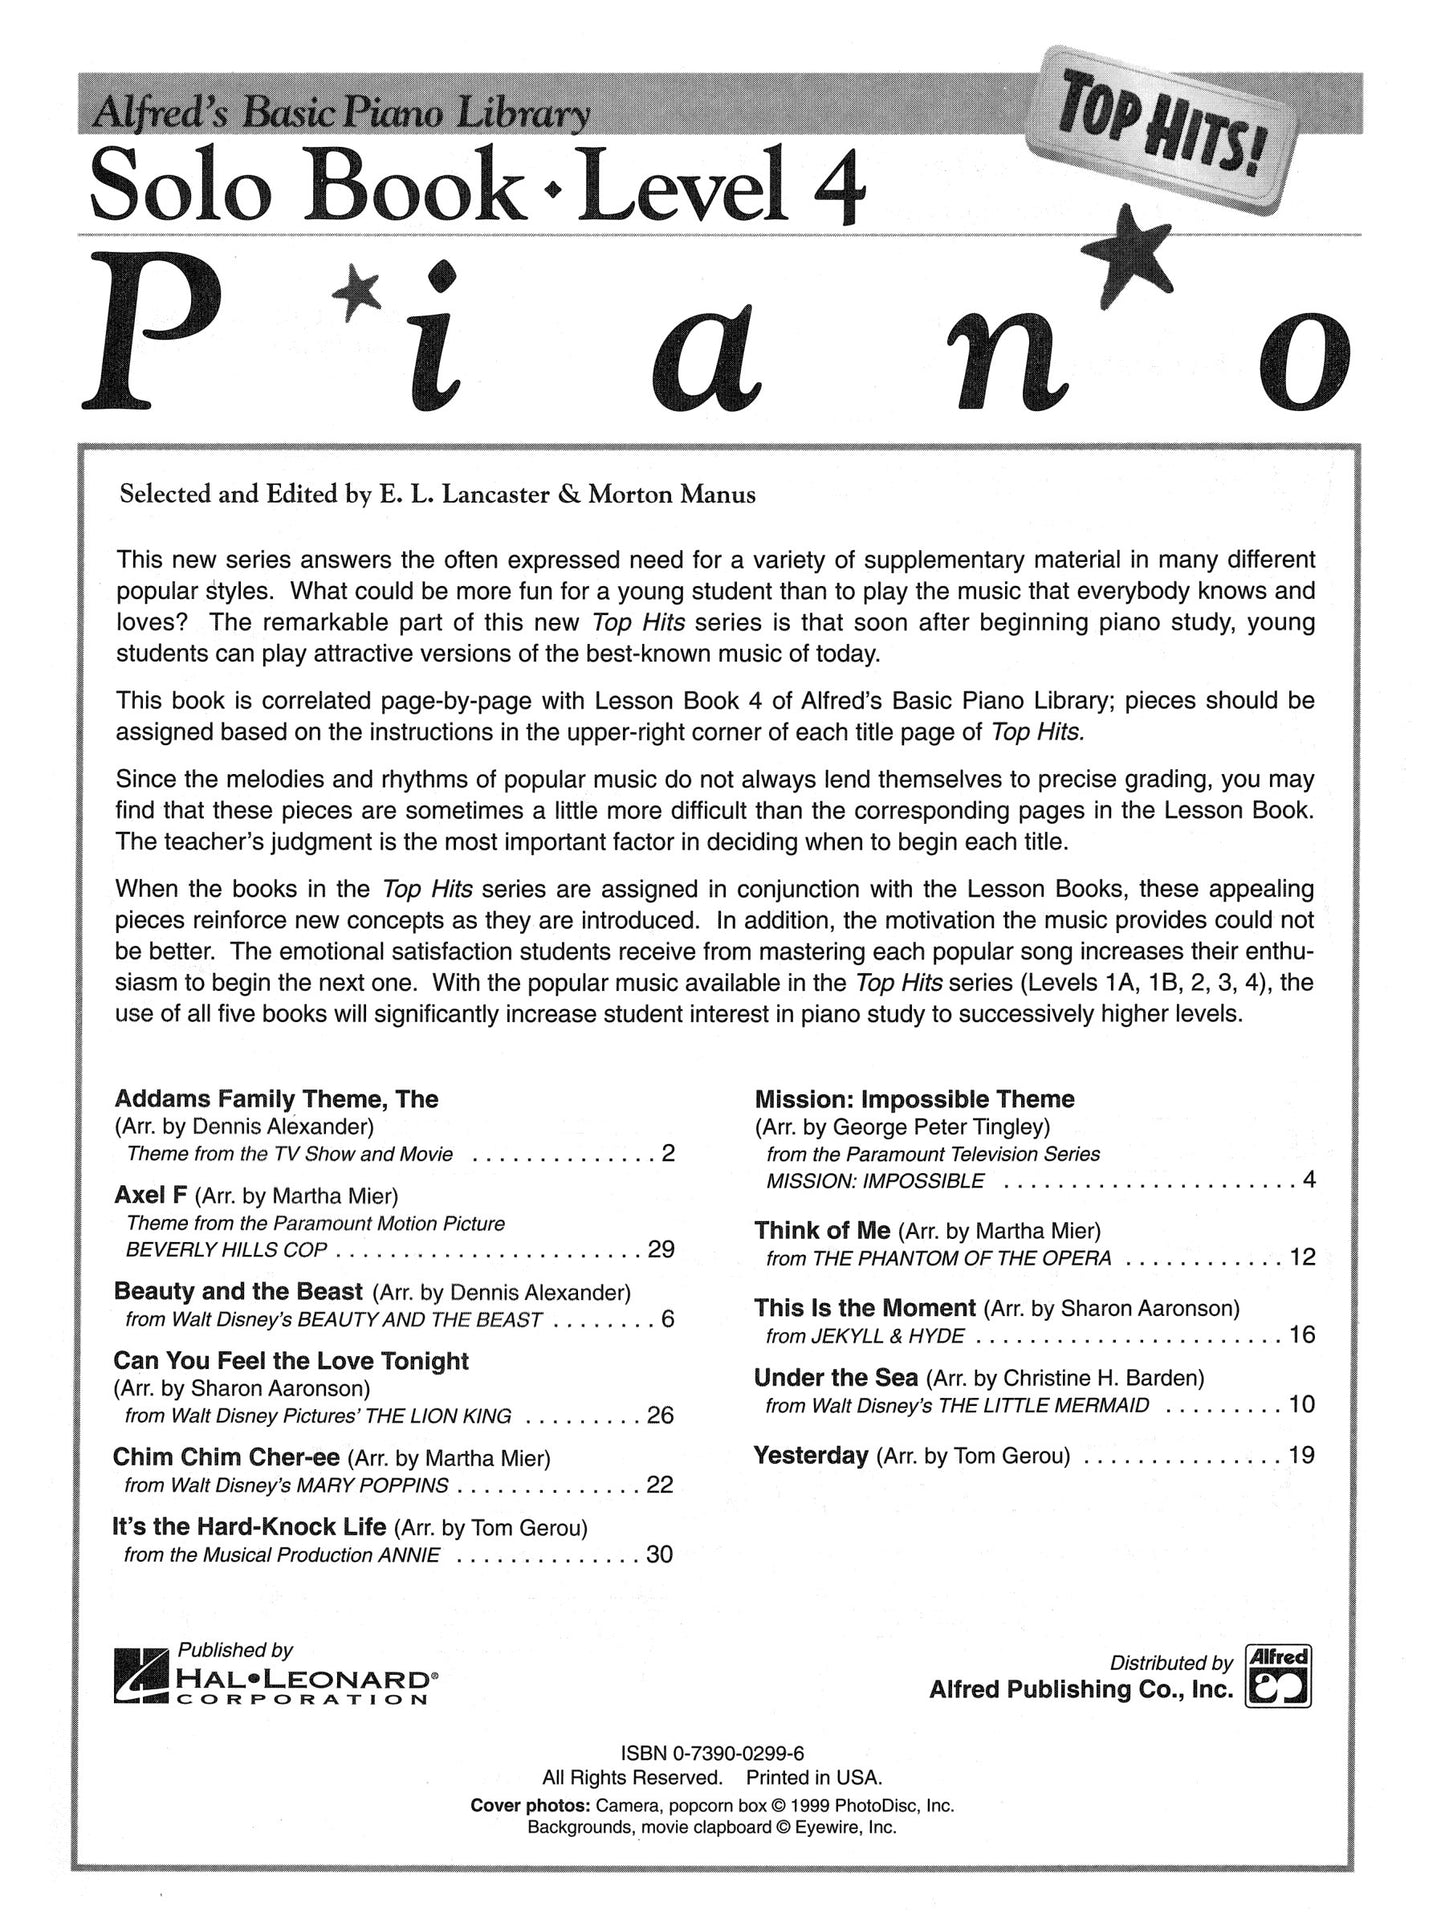 Alfred's Basic Piano Library - Top Hits Solo Book Level 4 (Book and Cd)